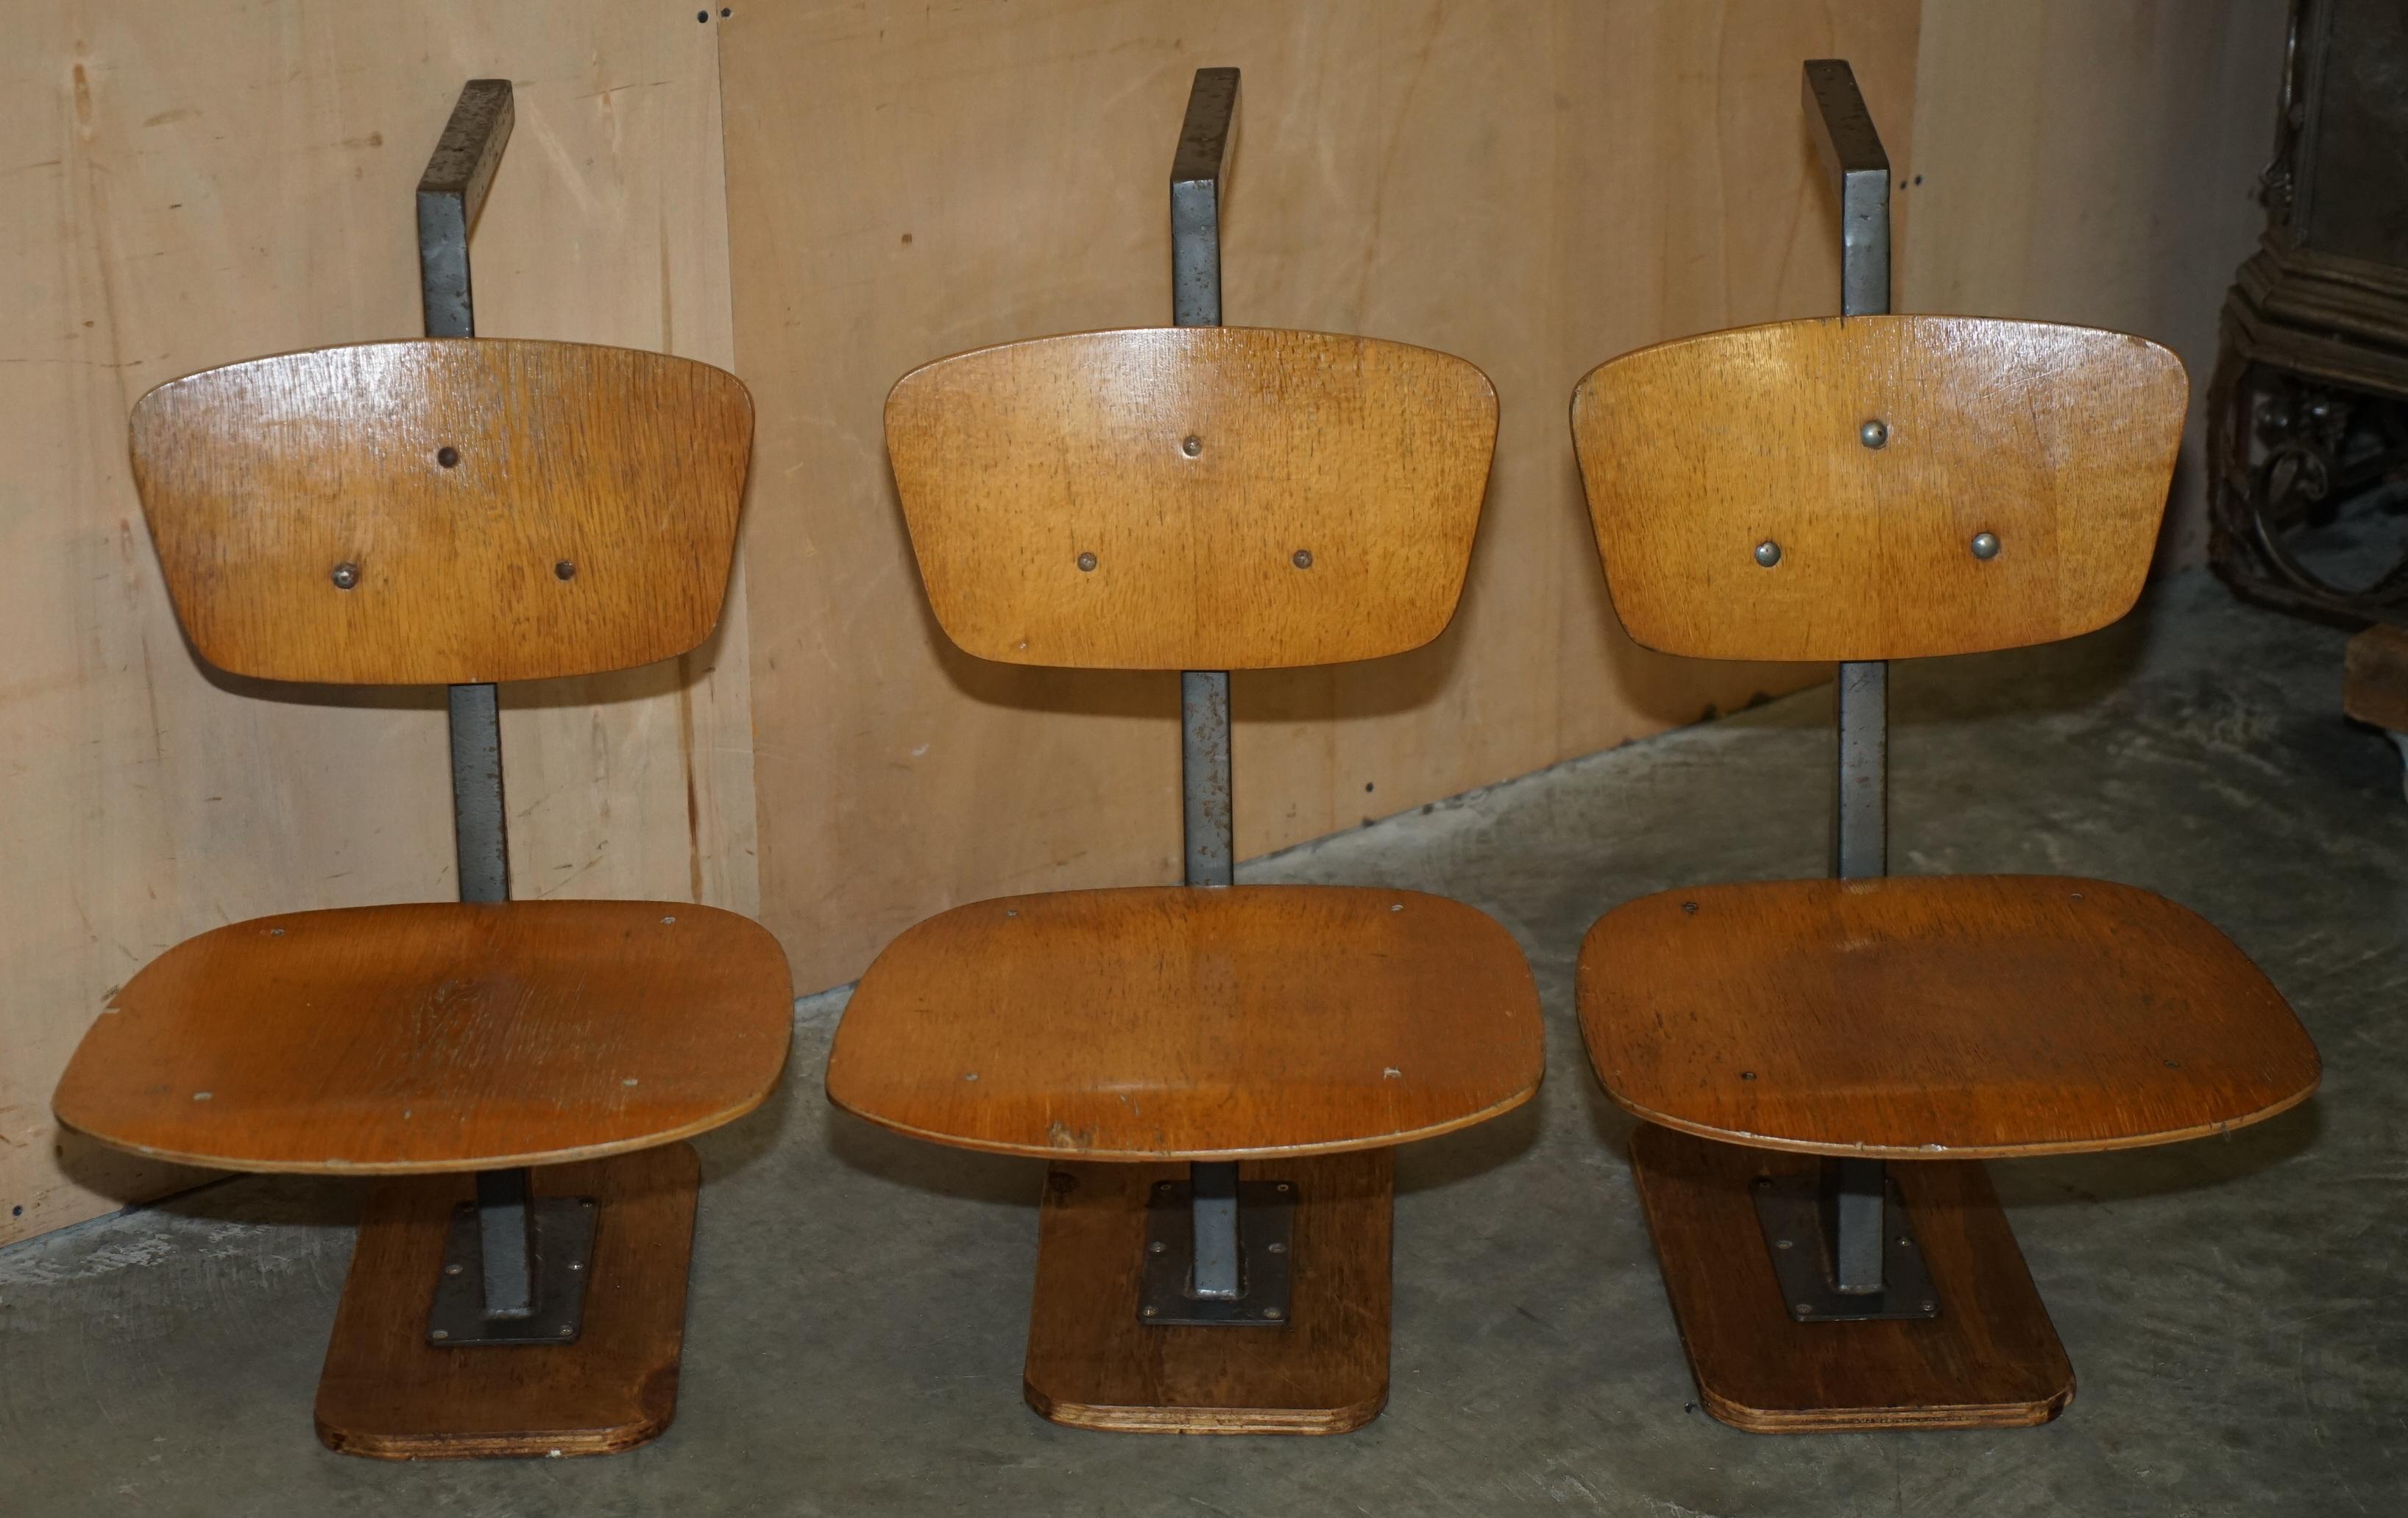 Royal House Antiques

Royal House Antiques is delighted to offer for sale this lovely suite of mid century modern folding stadium seating 

Please note the delivery fee listed is just a guide, it covers within the M25 only for the UK and local